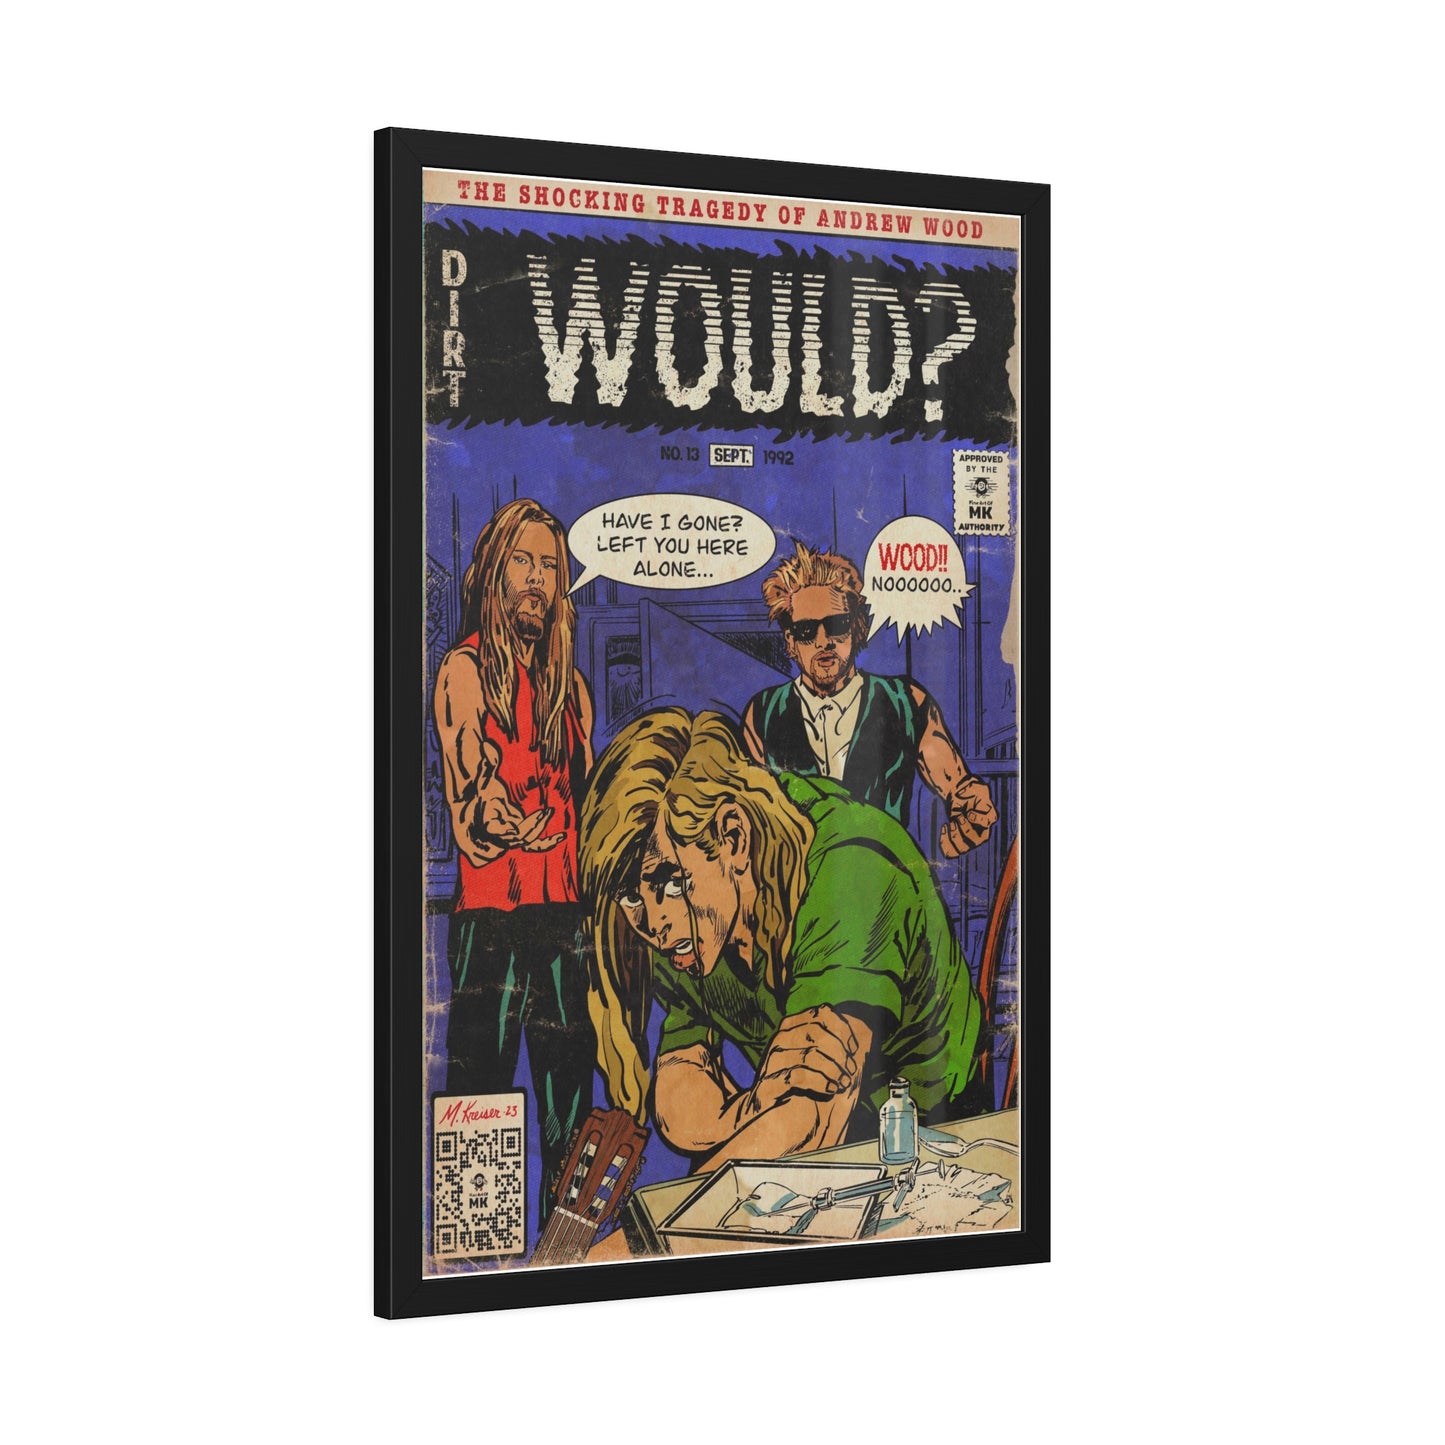 Alice In Chains - Would? - Framed Paper Posters